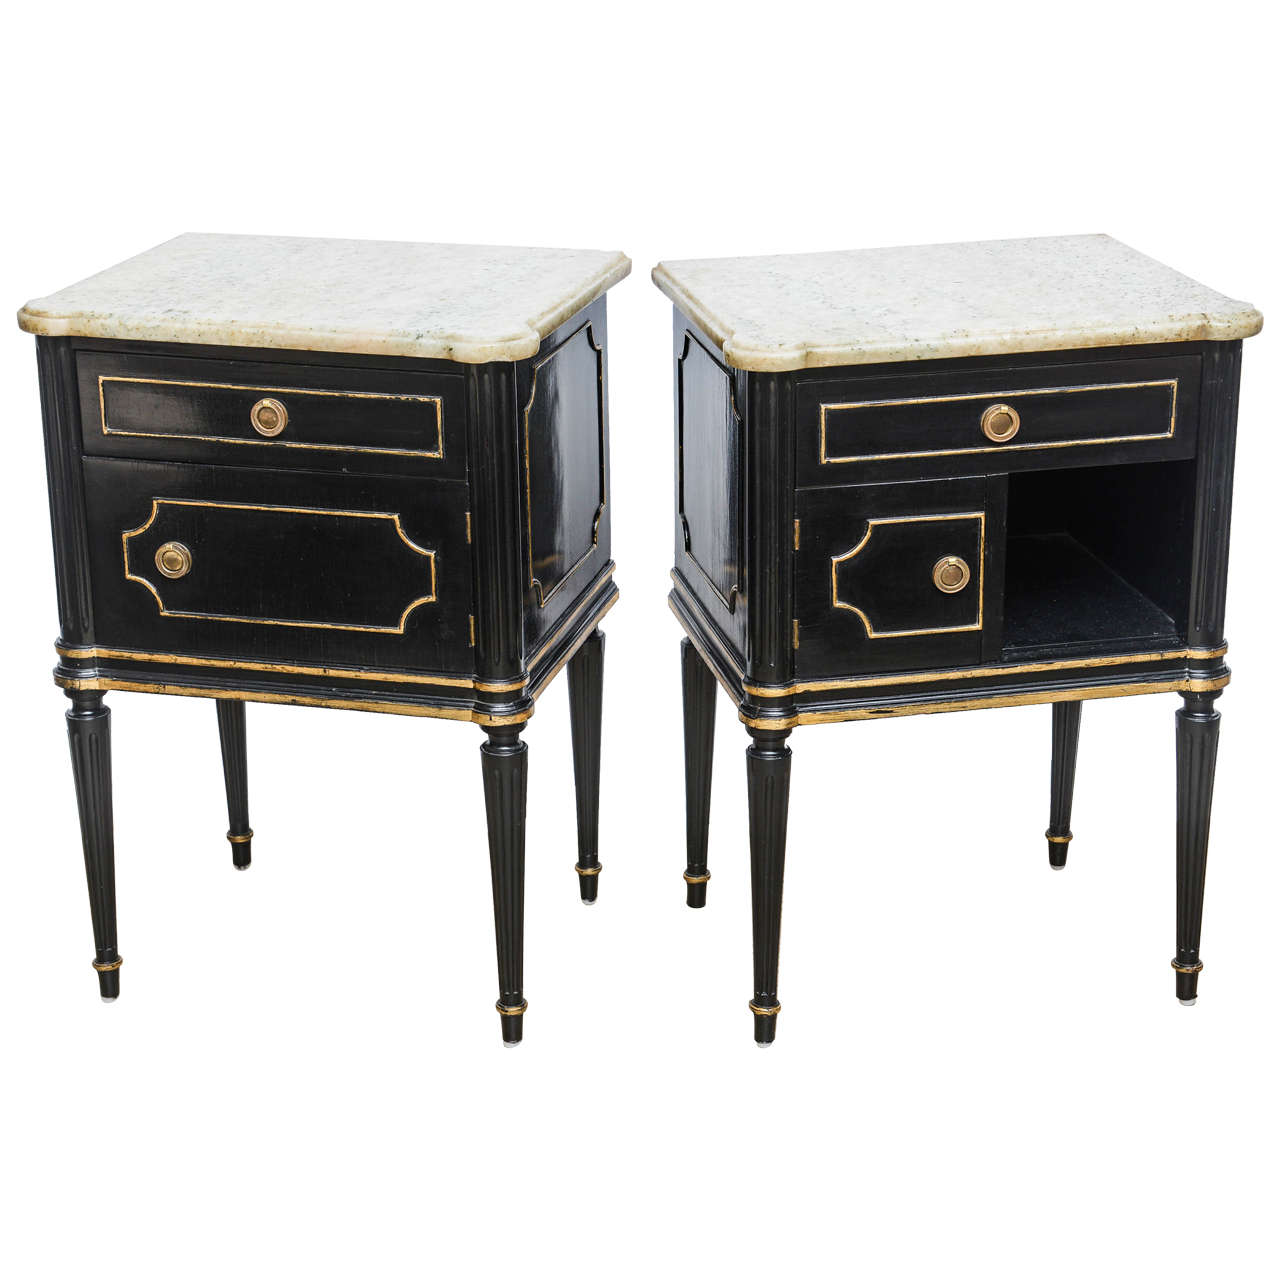 Pair of Maison Jensen Commodes with Marble Tops, 20th Century For Sale